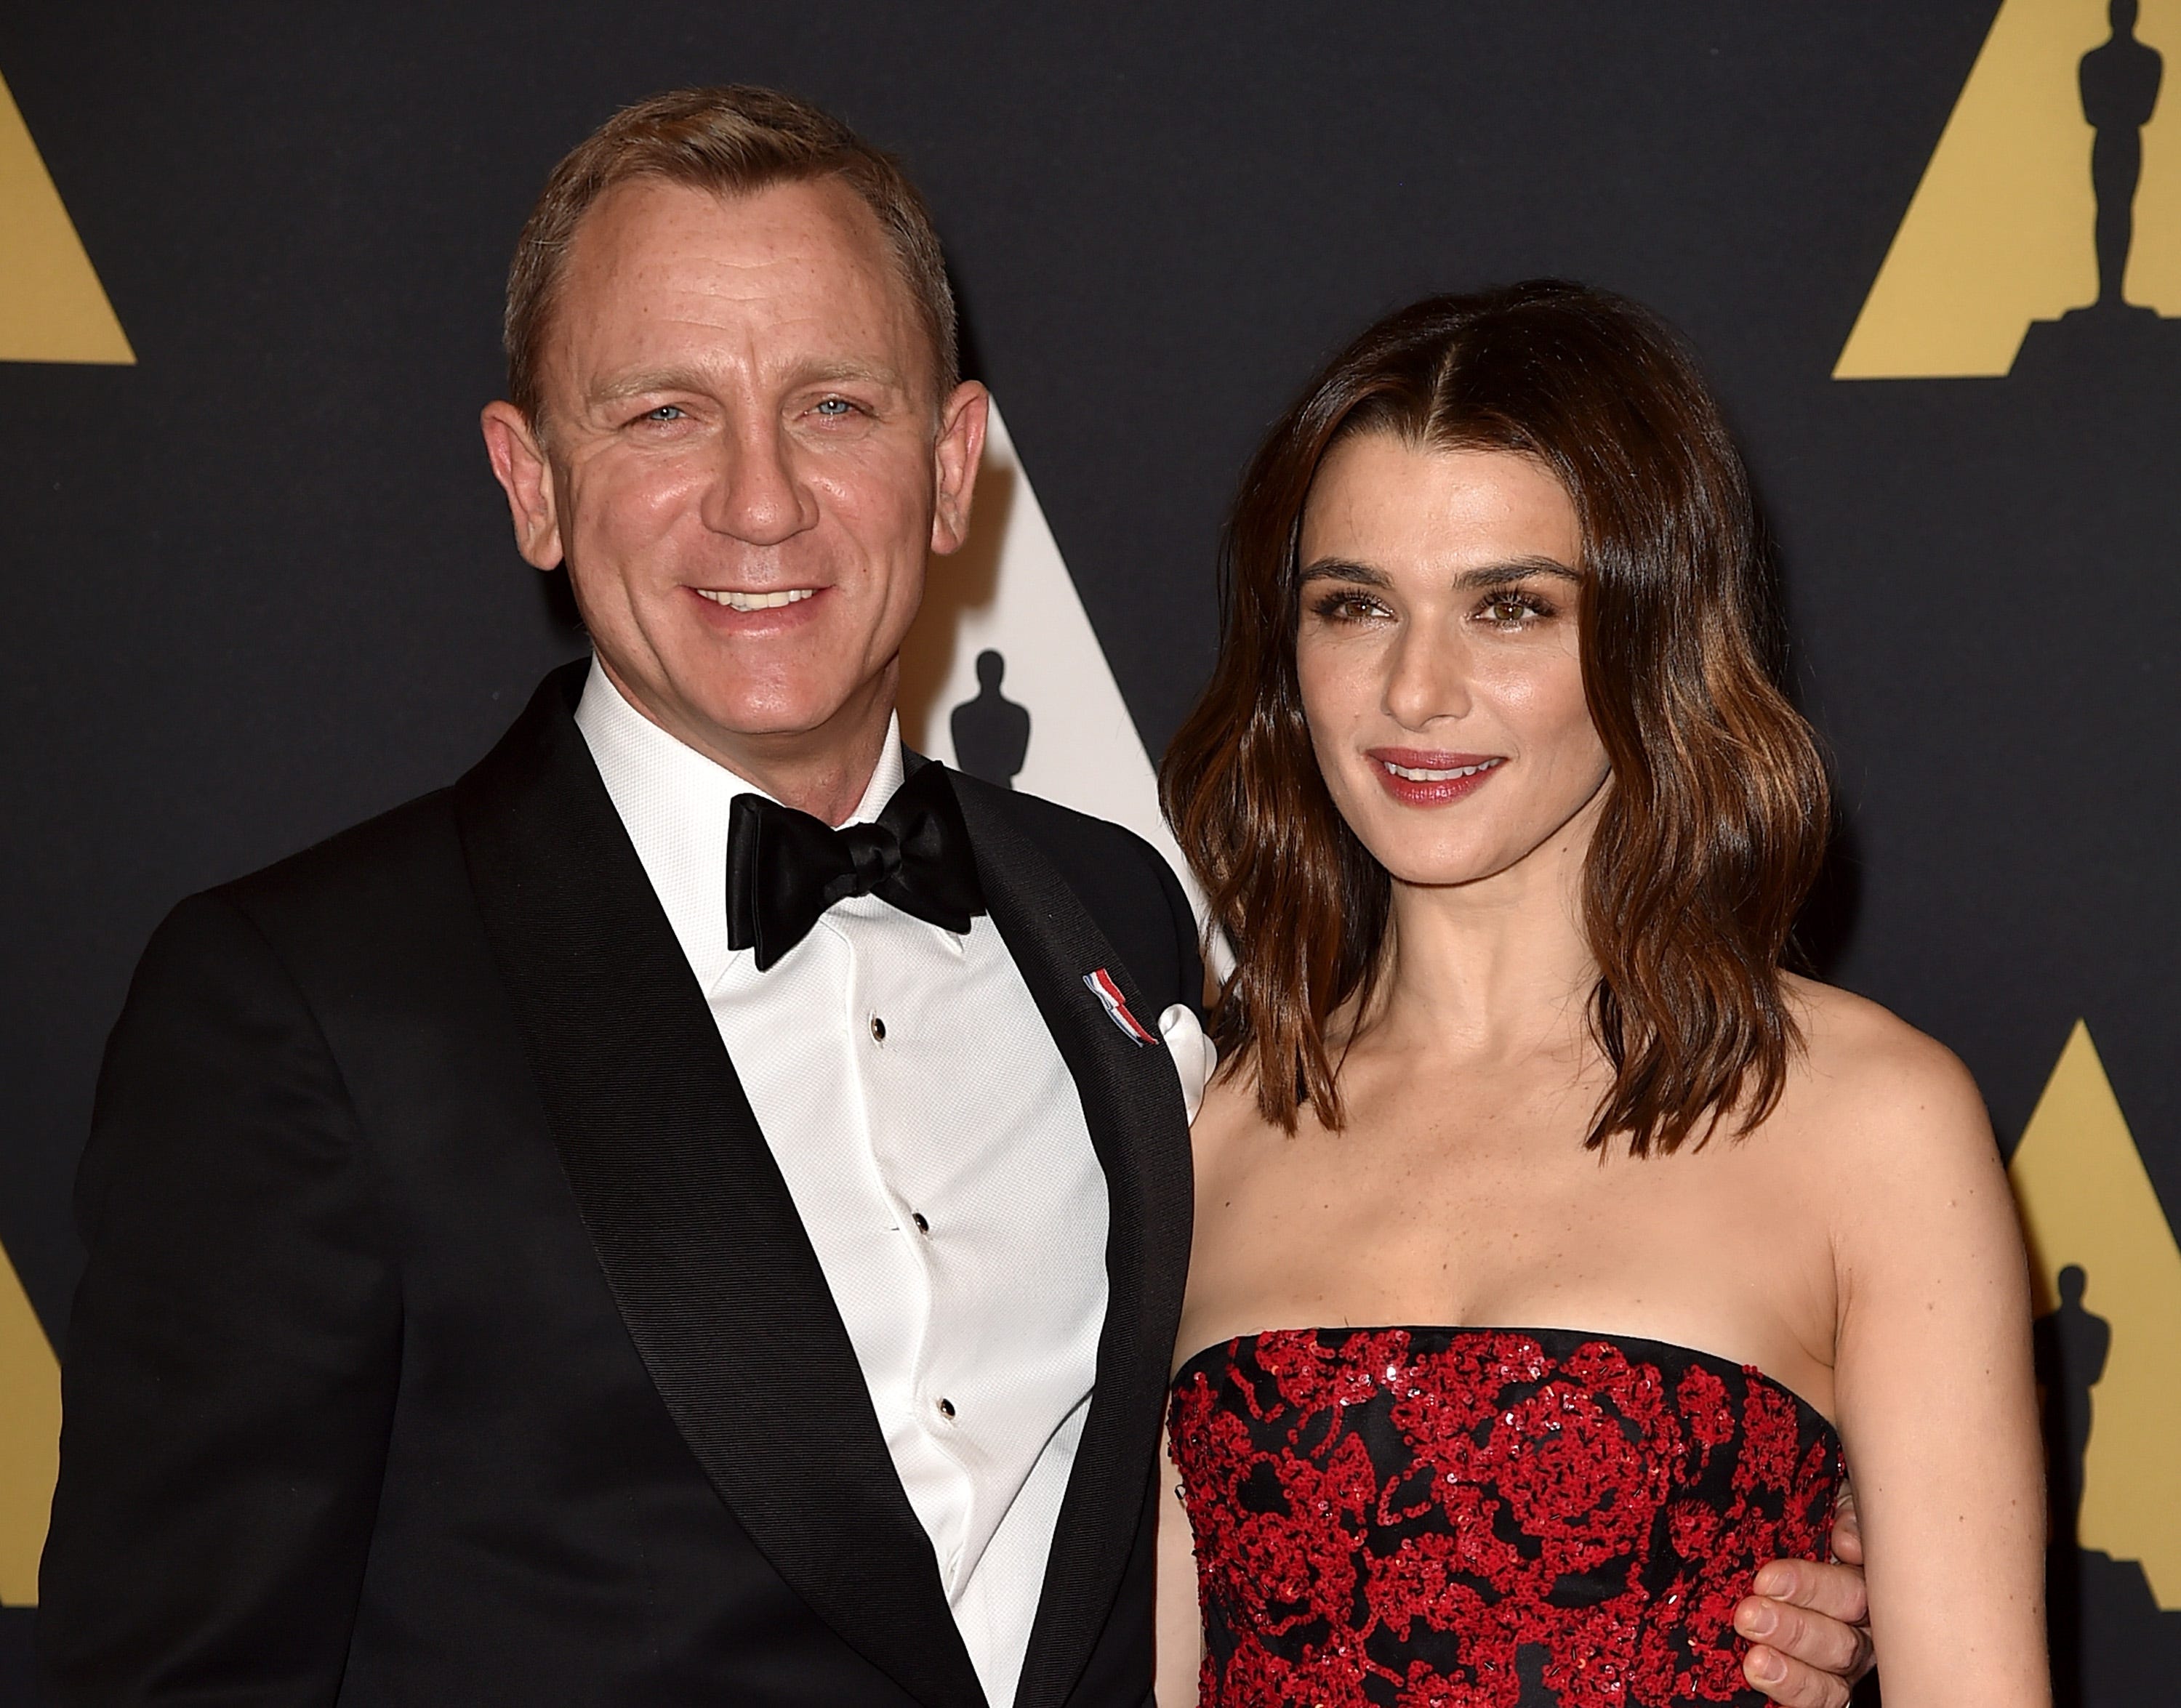 Rachel Weisz, 48, and Daniel Craig, 50, are expecting their first baby together